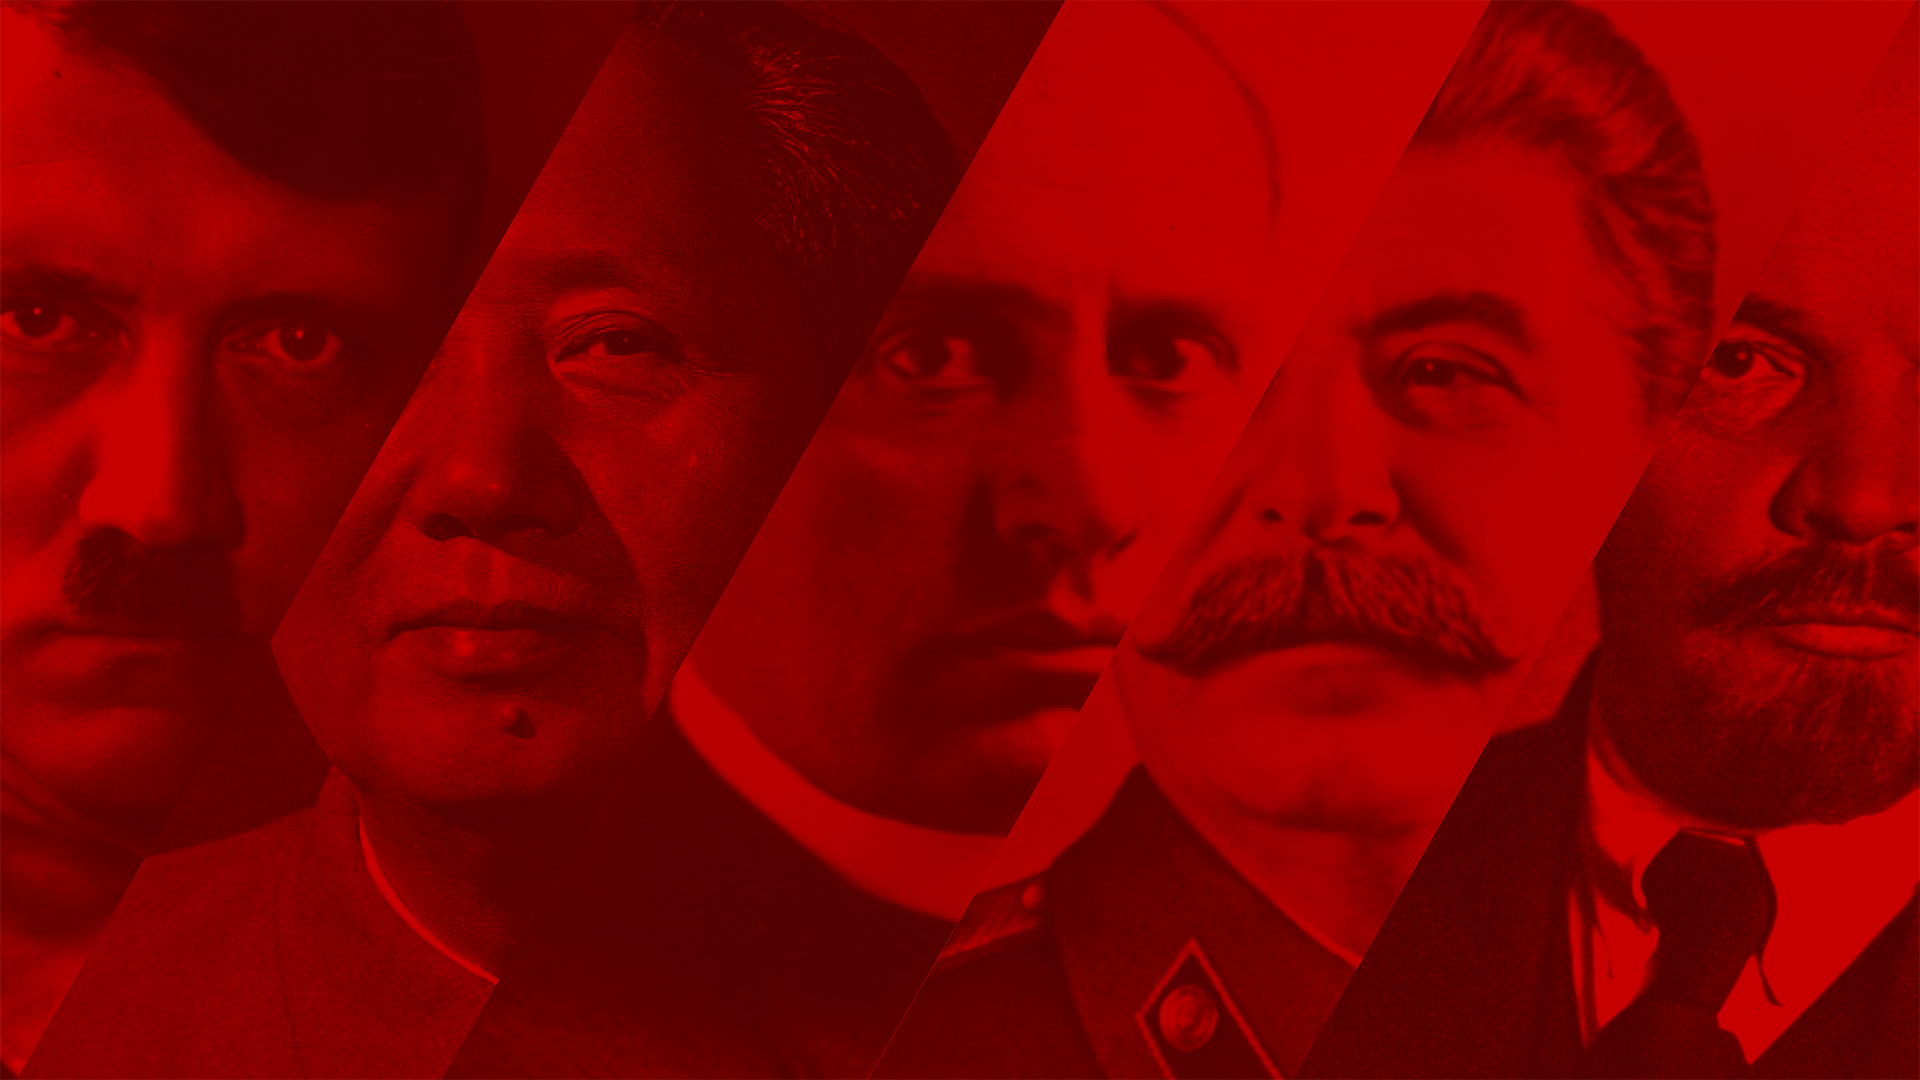 Collage of Hitler, Mao, Mussolini, Stalin and Lenin